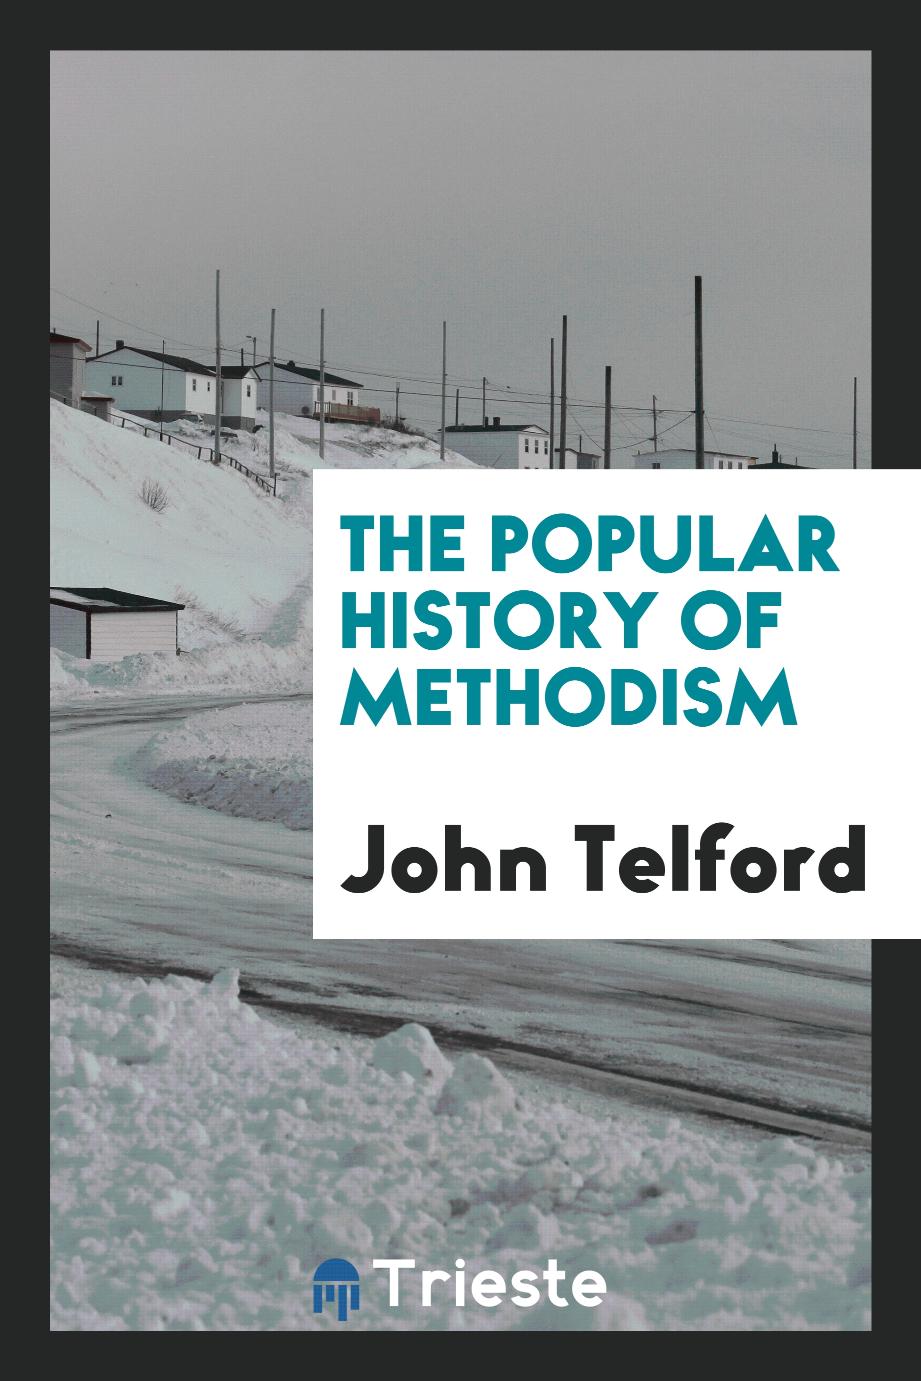 The popular history of Methodism